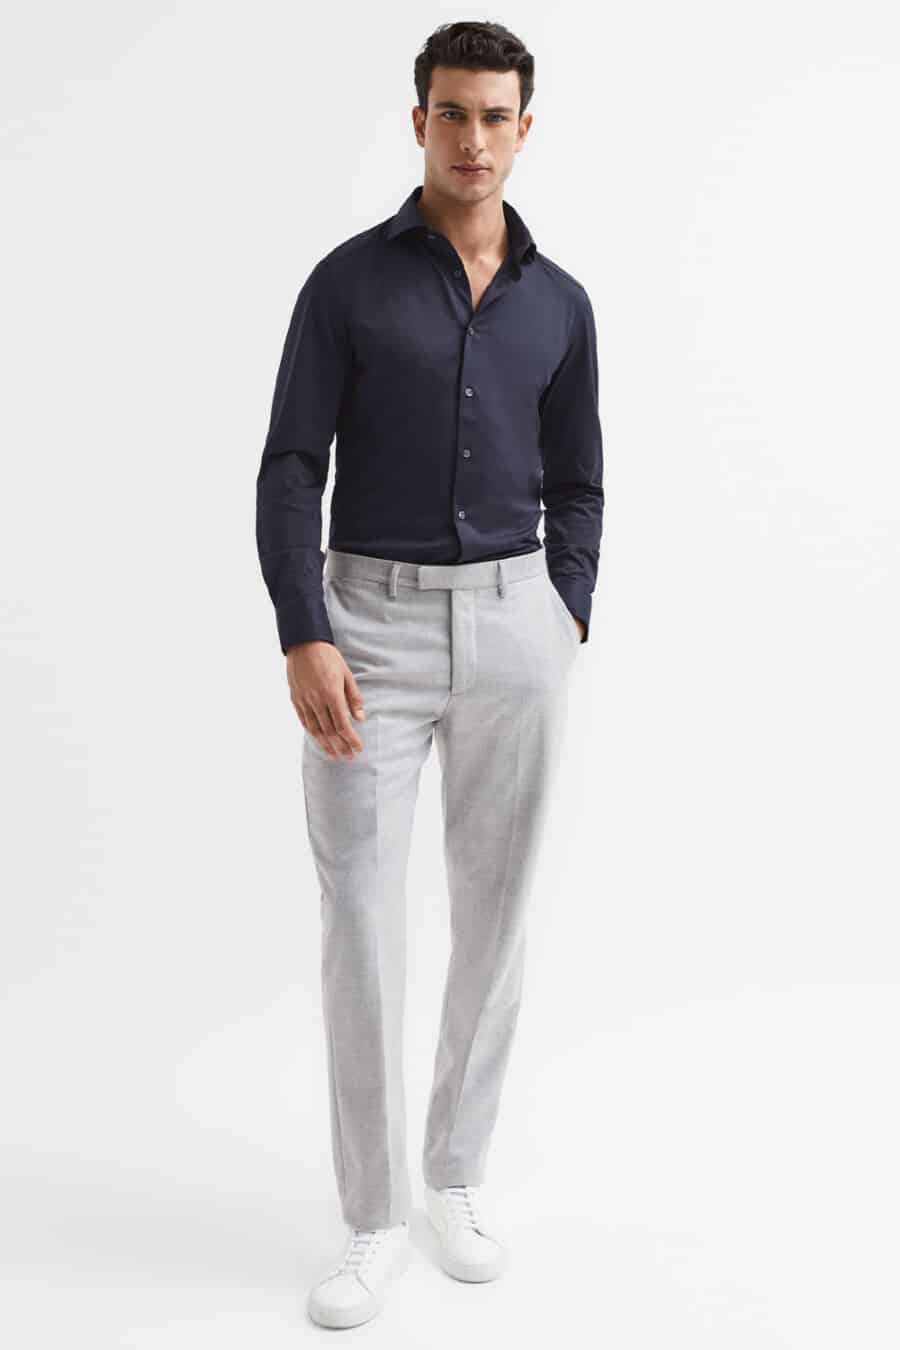 Men's light grey tailored trousers, navy fitted shirt and white sneakers outfit